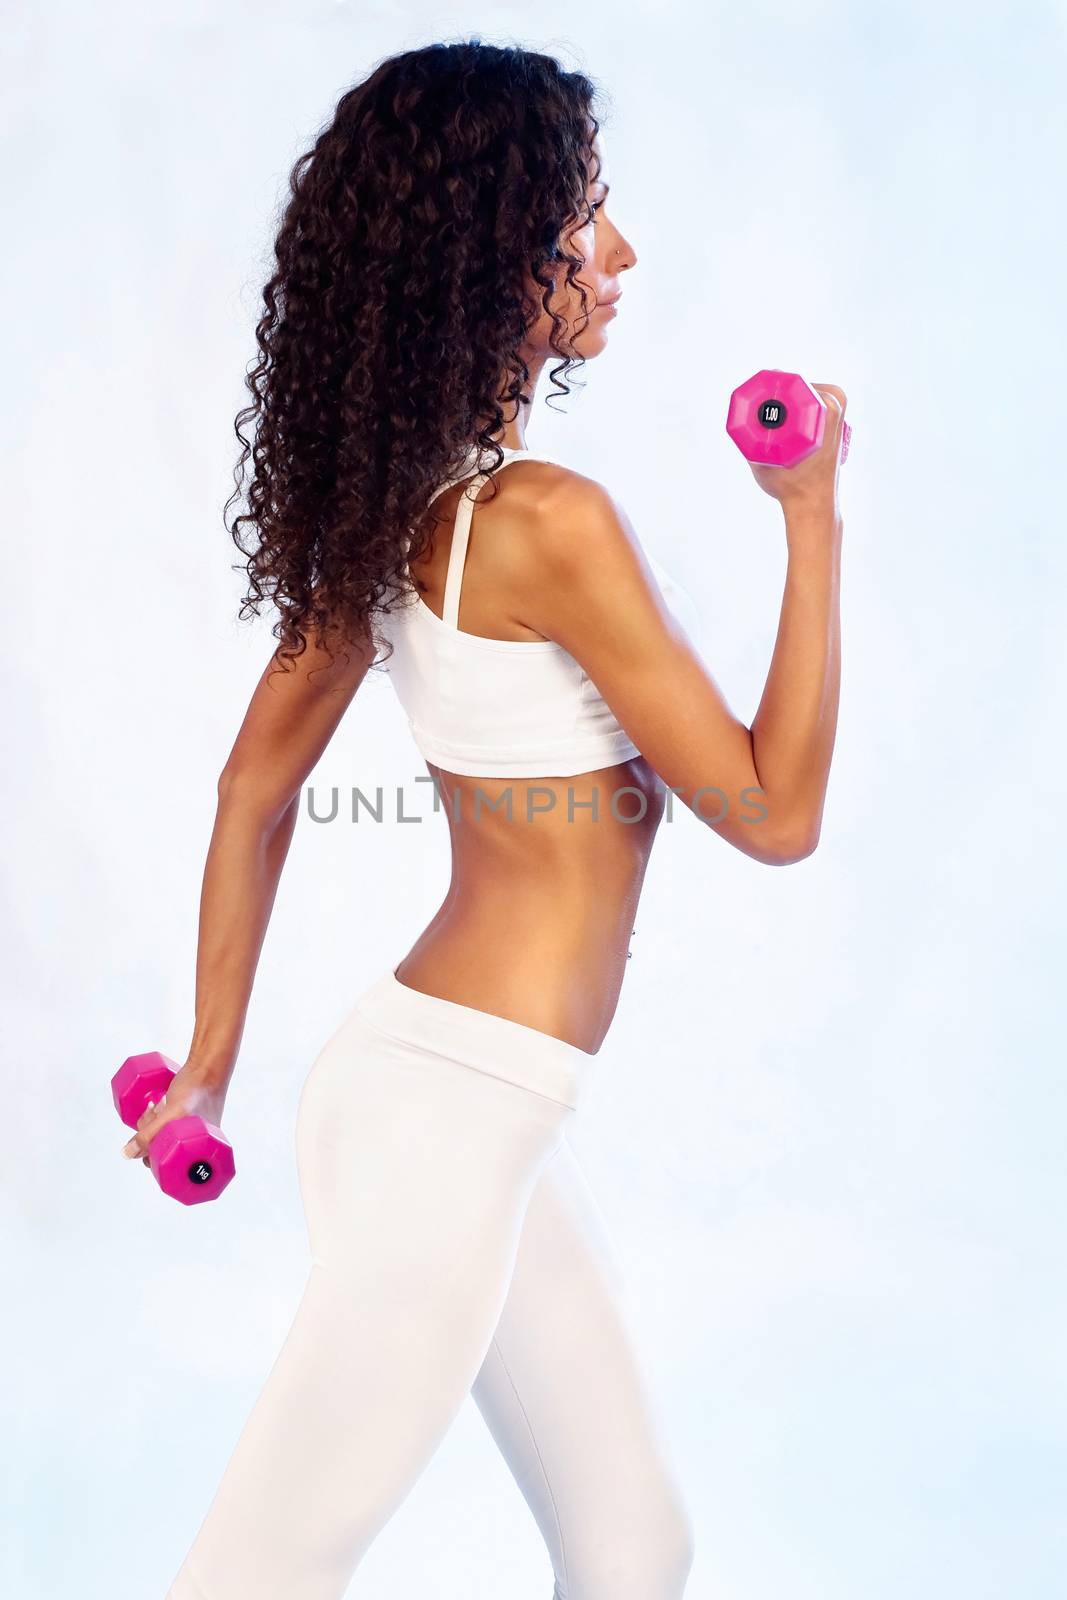 Young woman doing fitness exercises with weights, side view